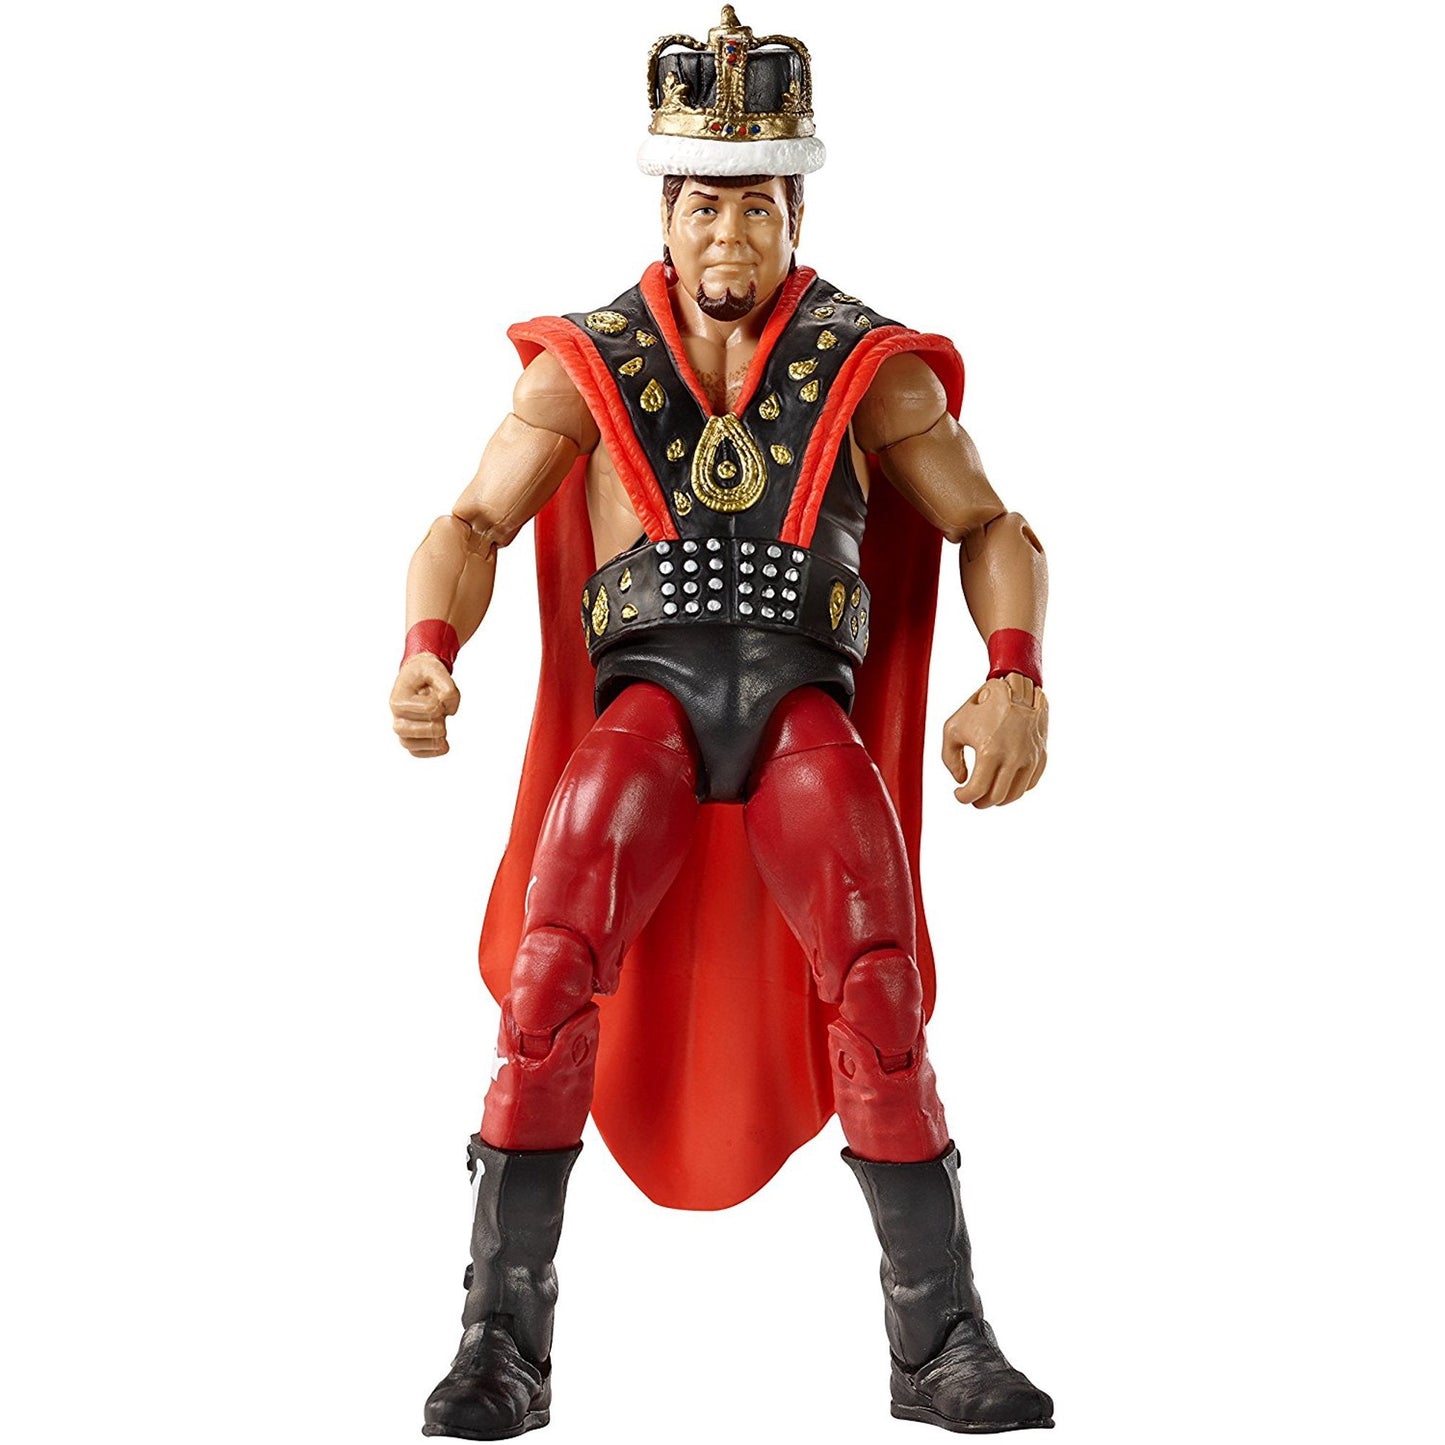 2017 WWE Mattel Elite Collection Hall of Fame Series 4 Jerry "The King" Lawler [Exclusive]